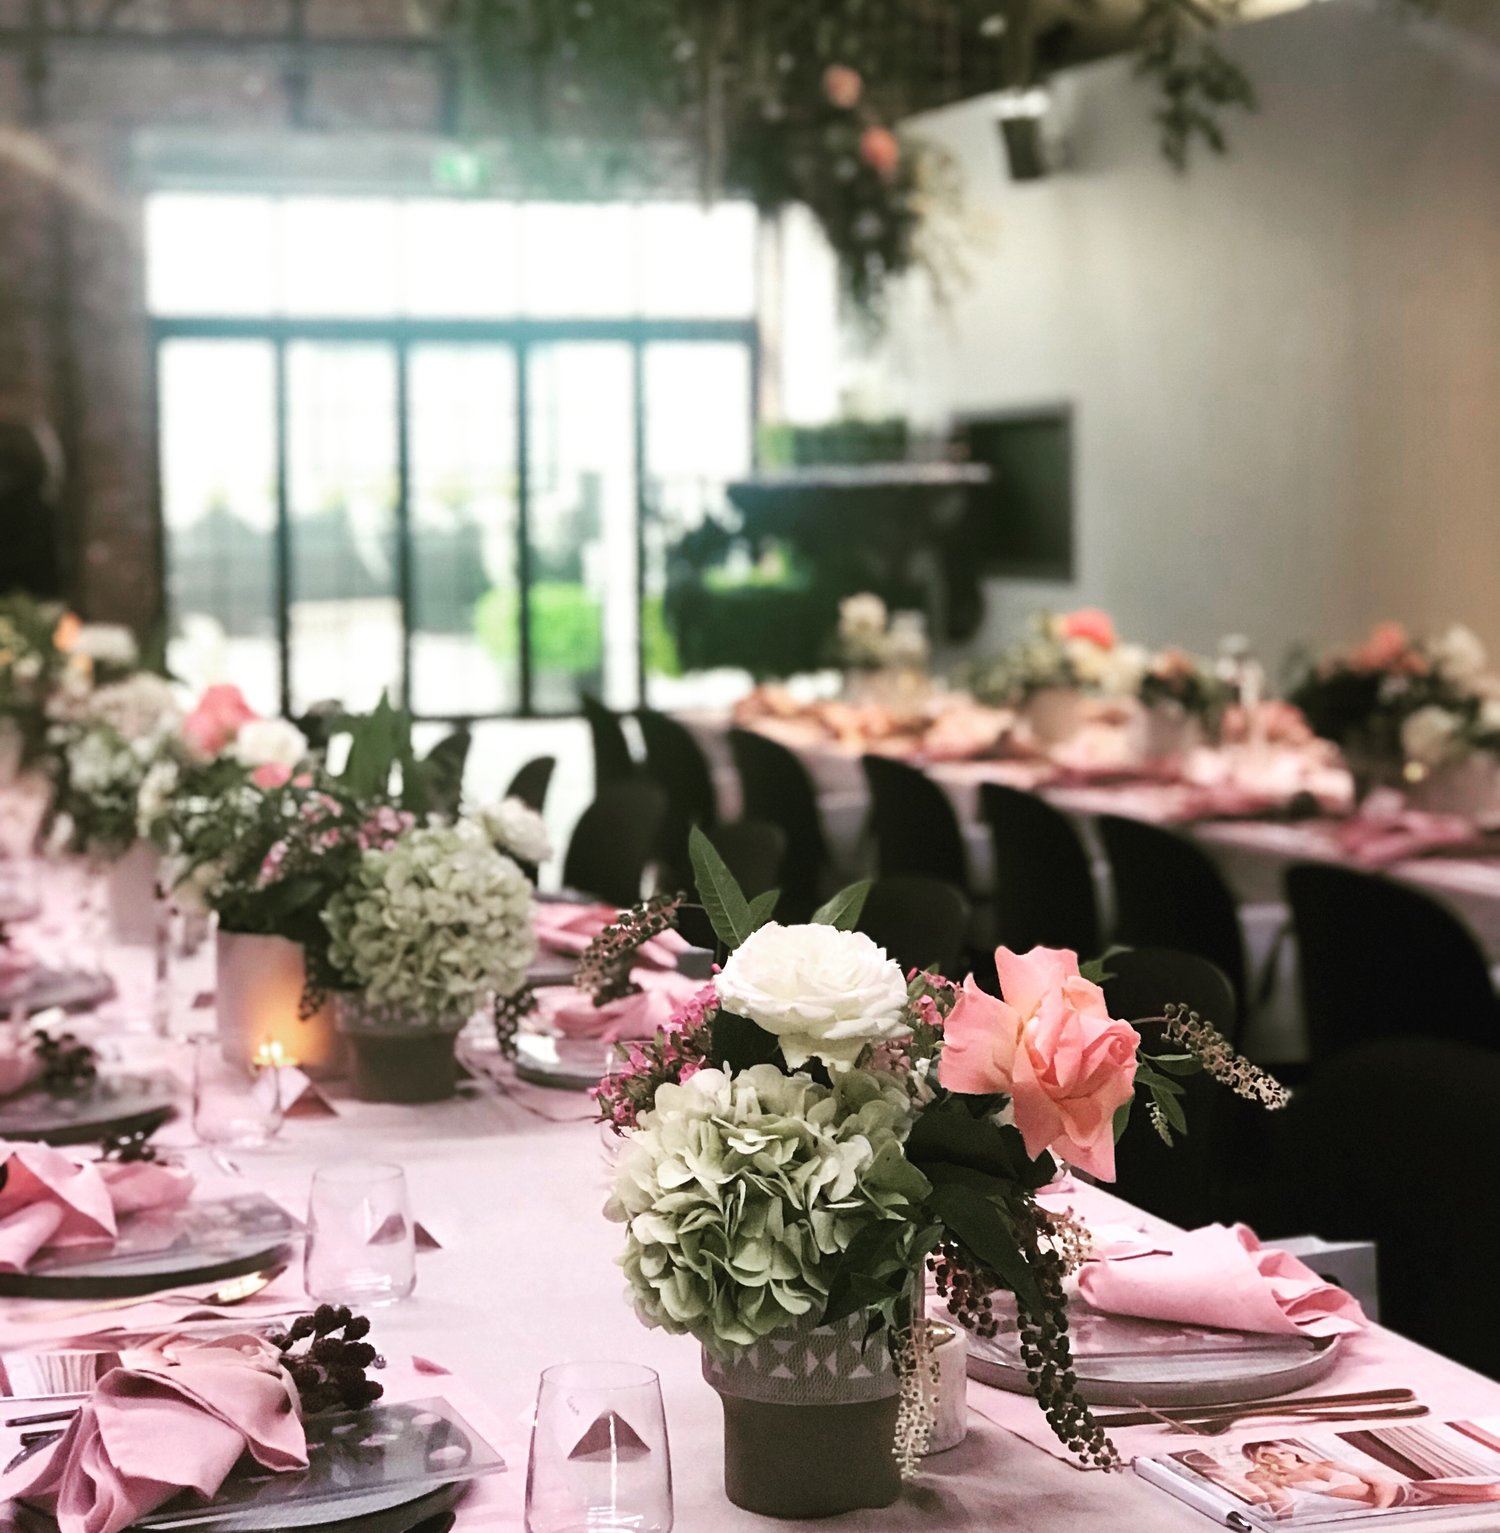 A beautifully decorated wedding reception table with pink and white flowers, perfect for dinner party venues in Melbourne.